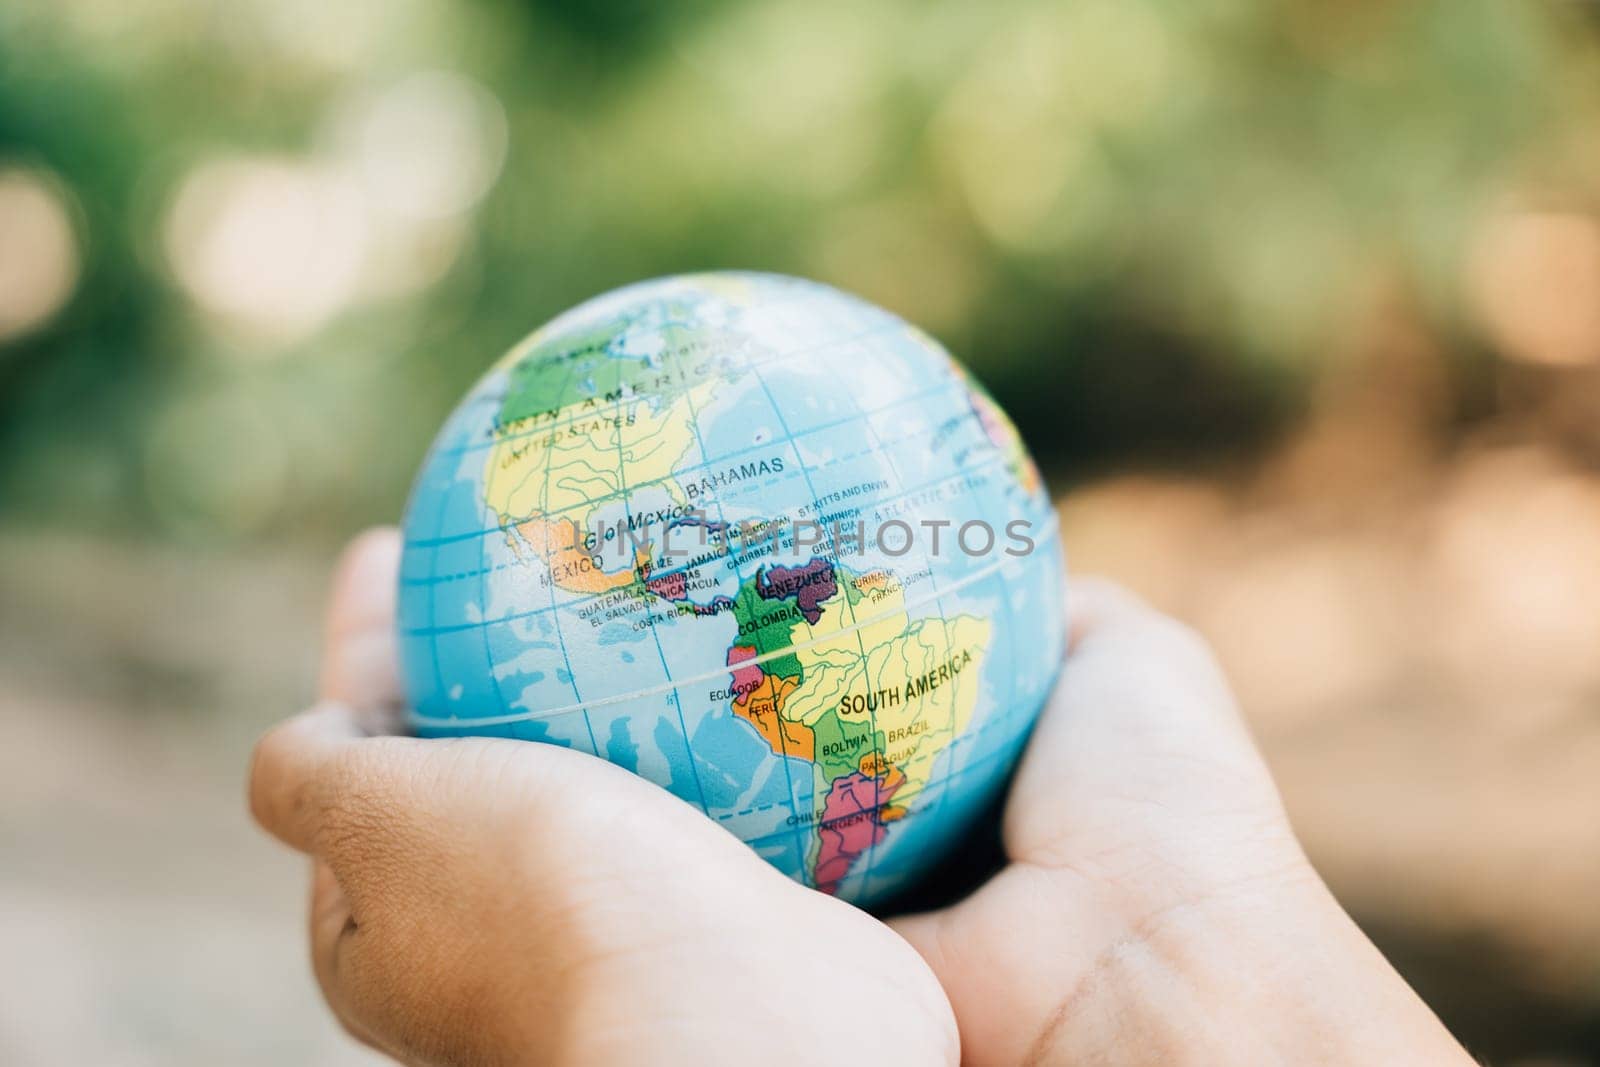 World Earth Day calls for holding the globe and a green leaf, symbolizing Green Energy, ESG, and Environmental Responsibility. Support our planet's vitality and environmental care.